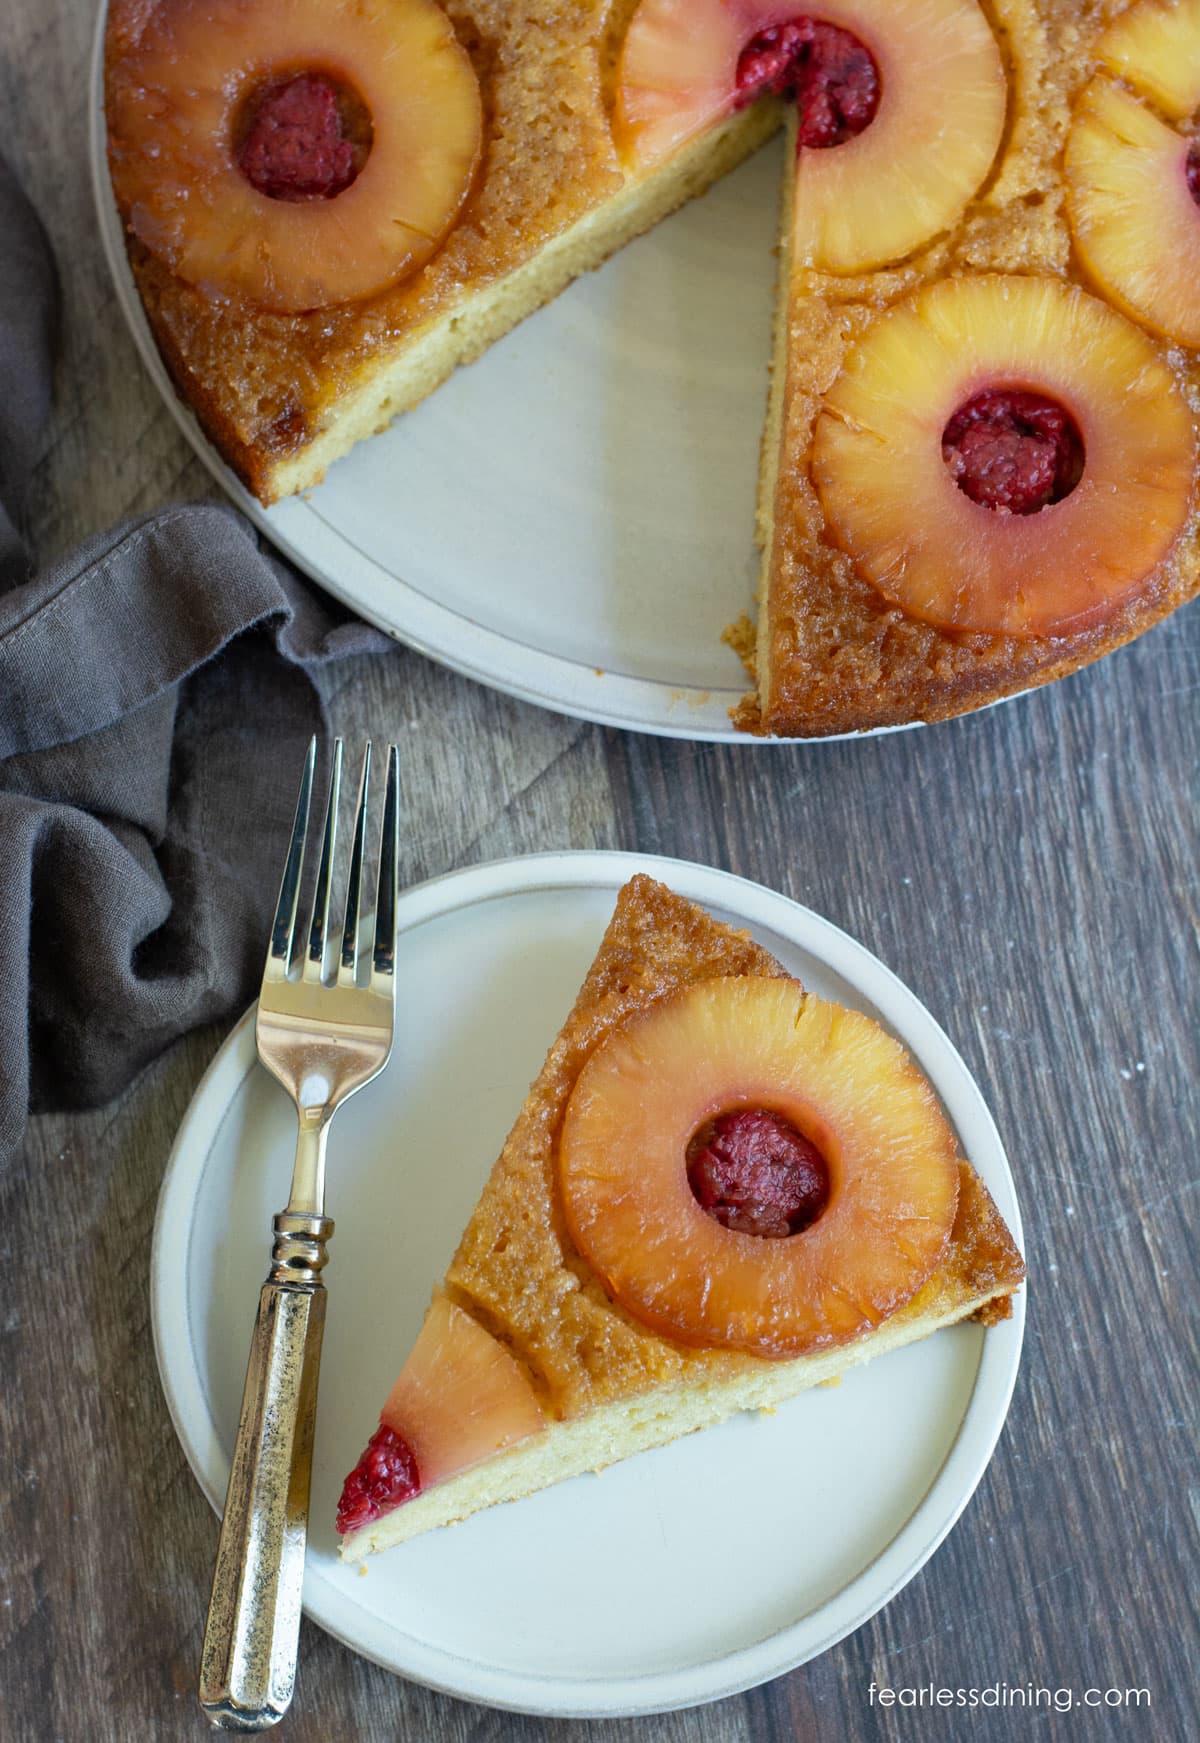 The top view of a slice of pineapple upside down cake next to the whole cake.